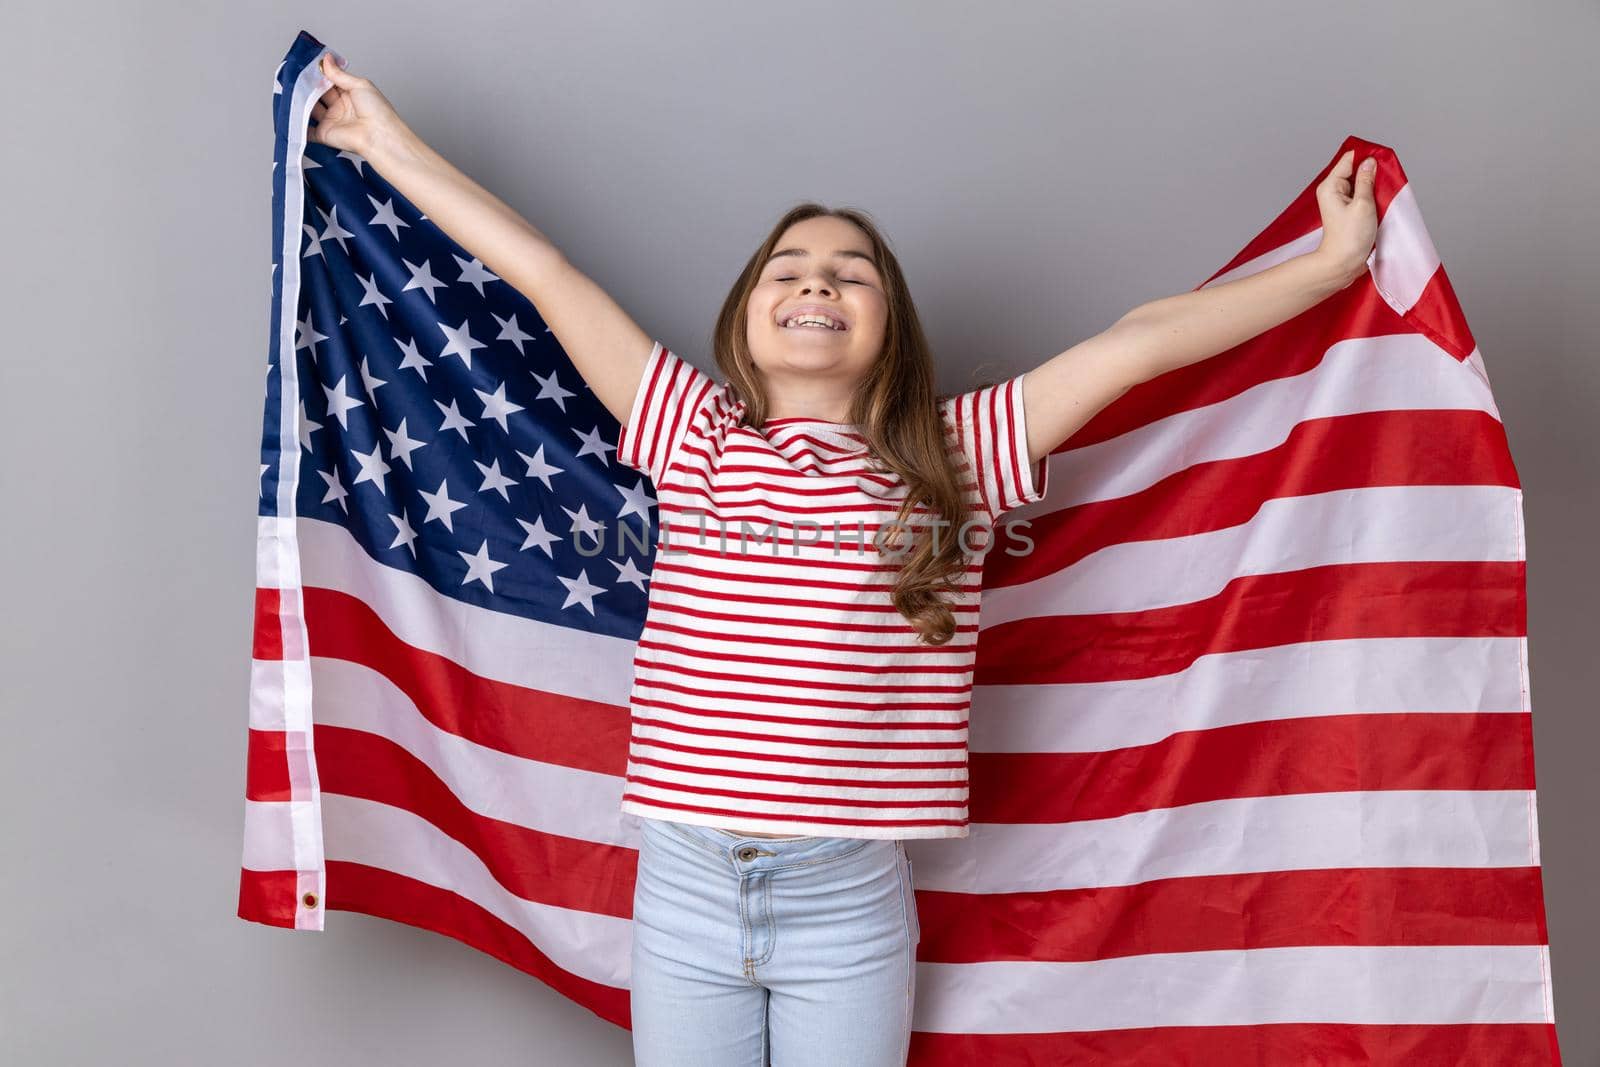 Portrait of extremely happy little girl wearing striped T-shirt holding USA flag over shoulders and keeps eyes closed and smiling happily. Indoor studio shot isolated on gray background.